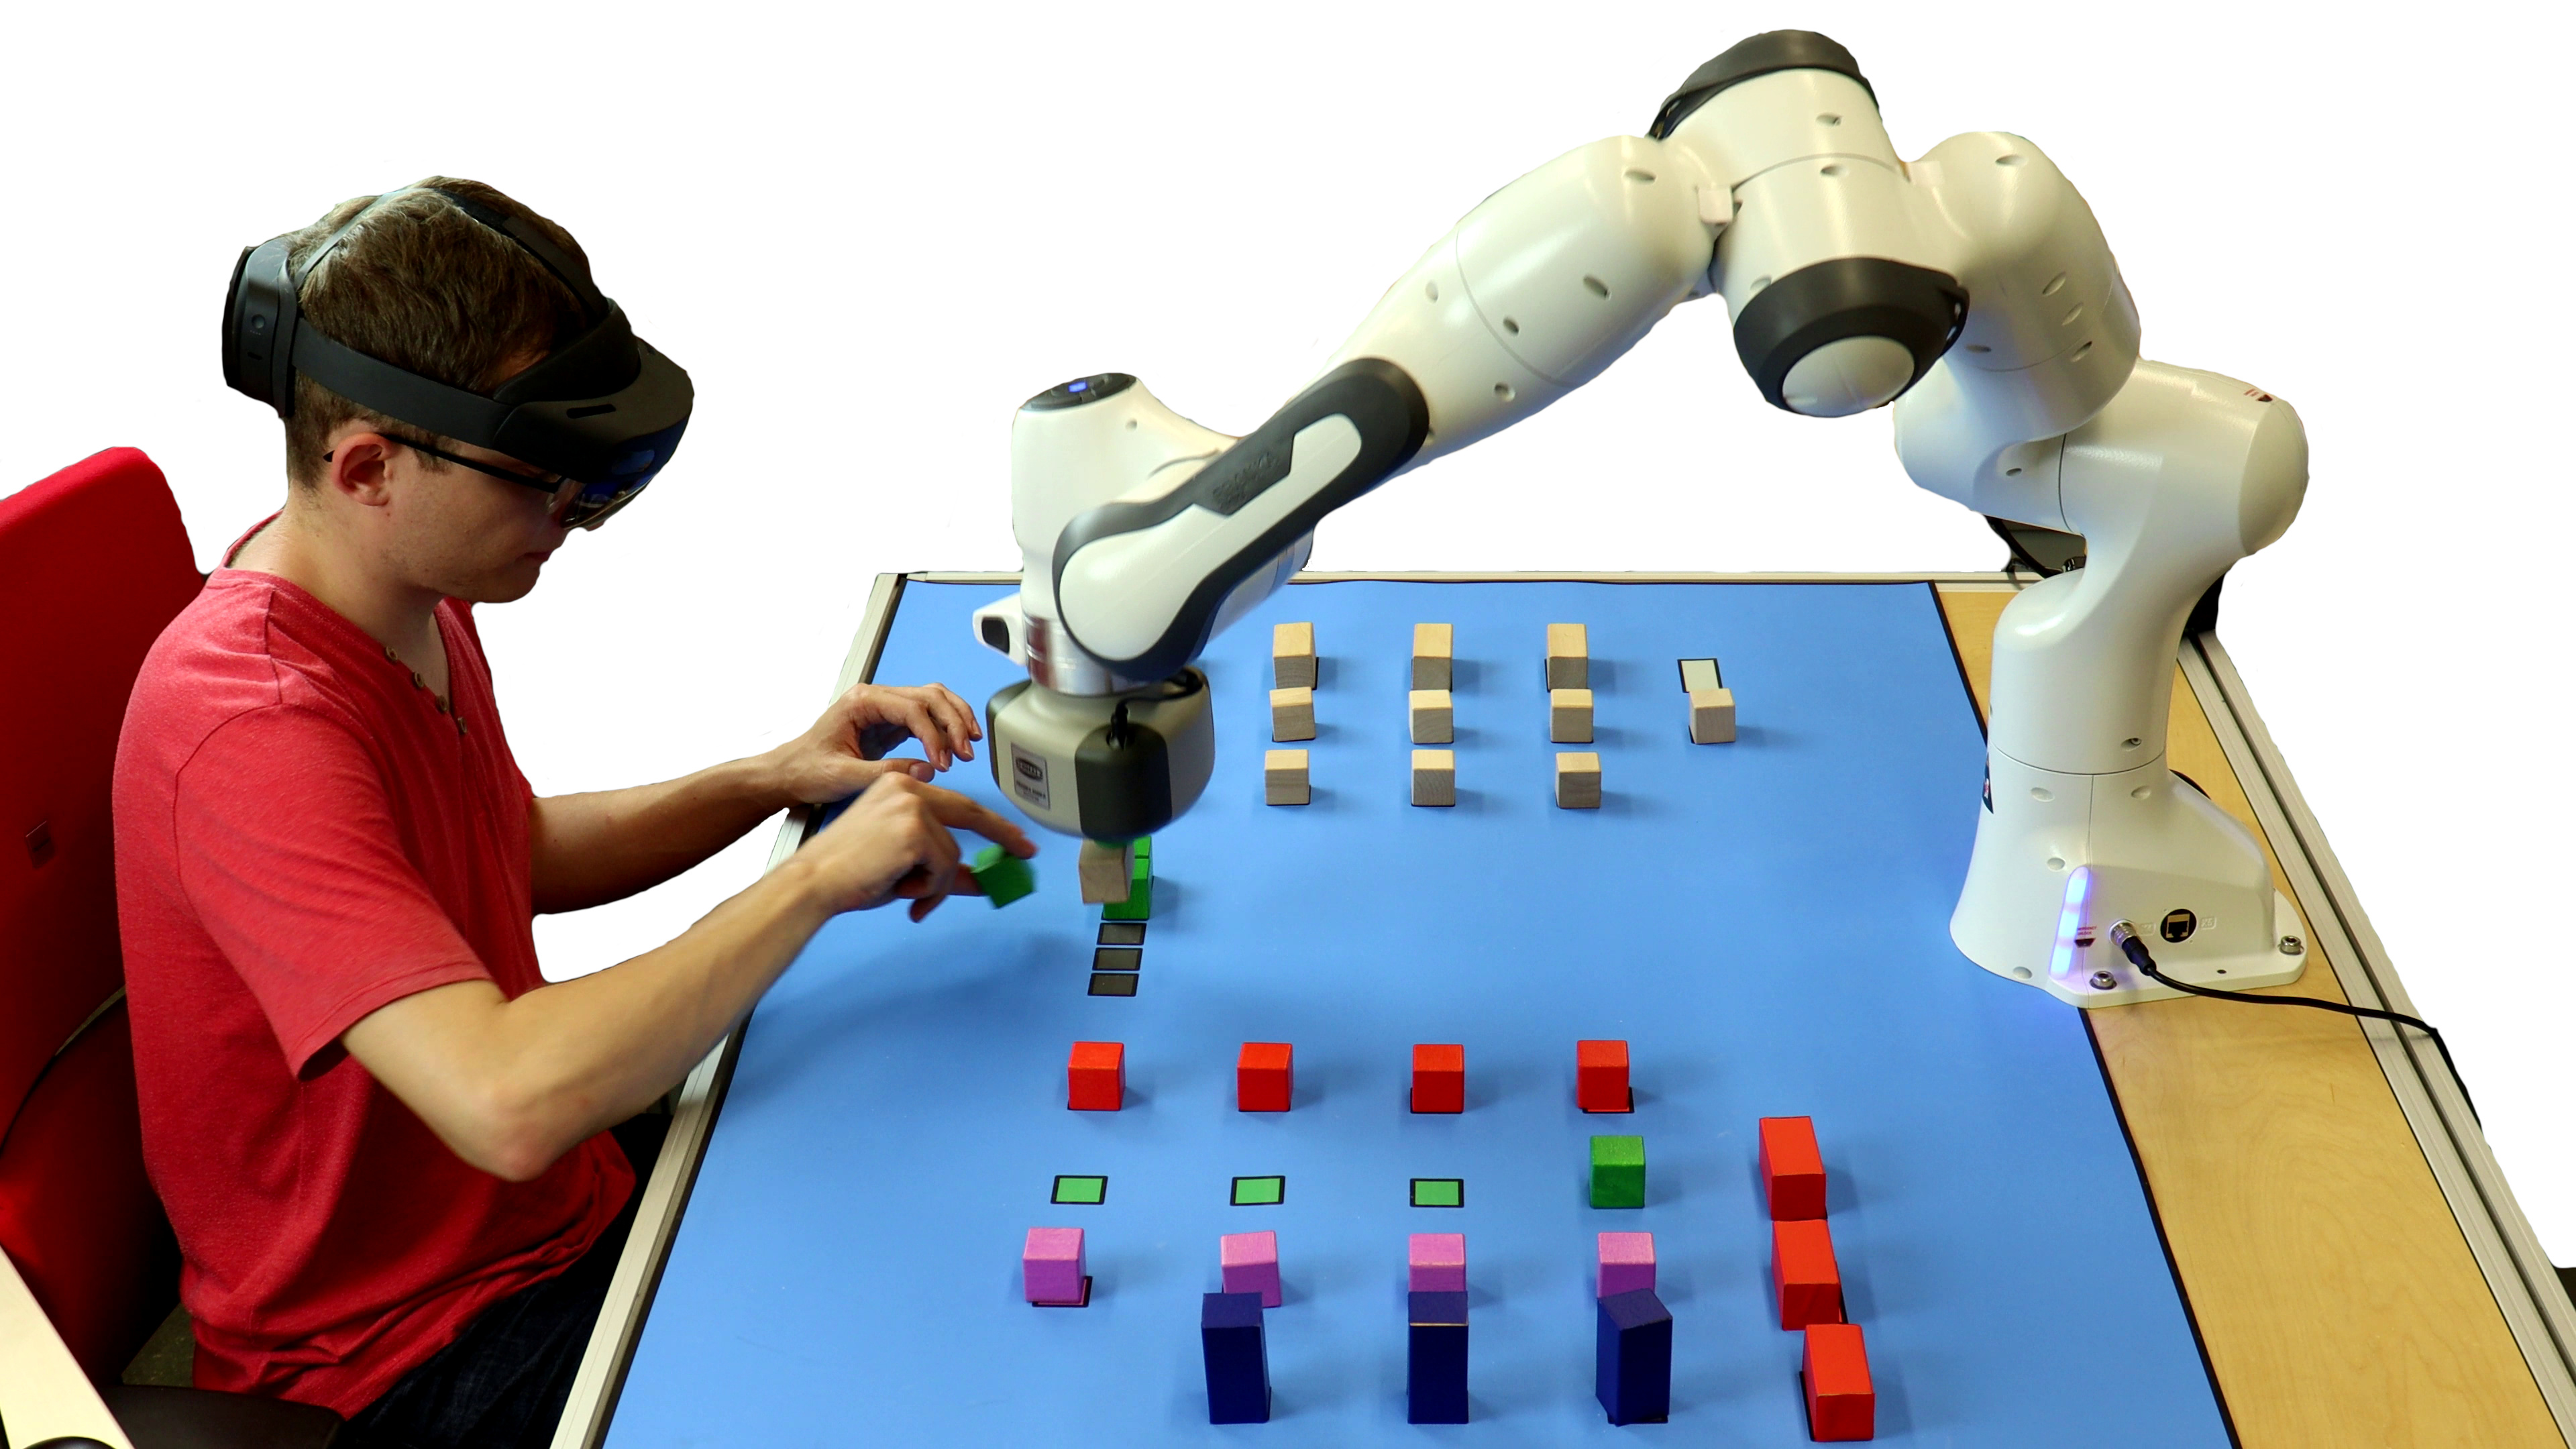 Human and robot cooperatively construct structure of building blocks.